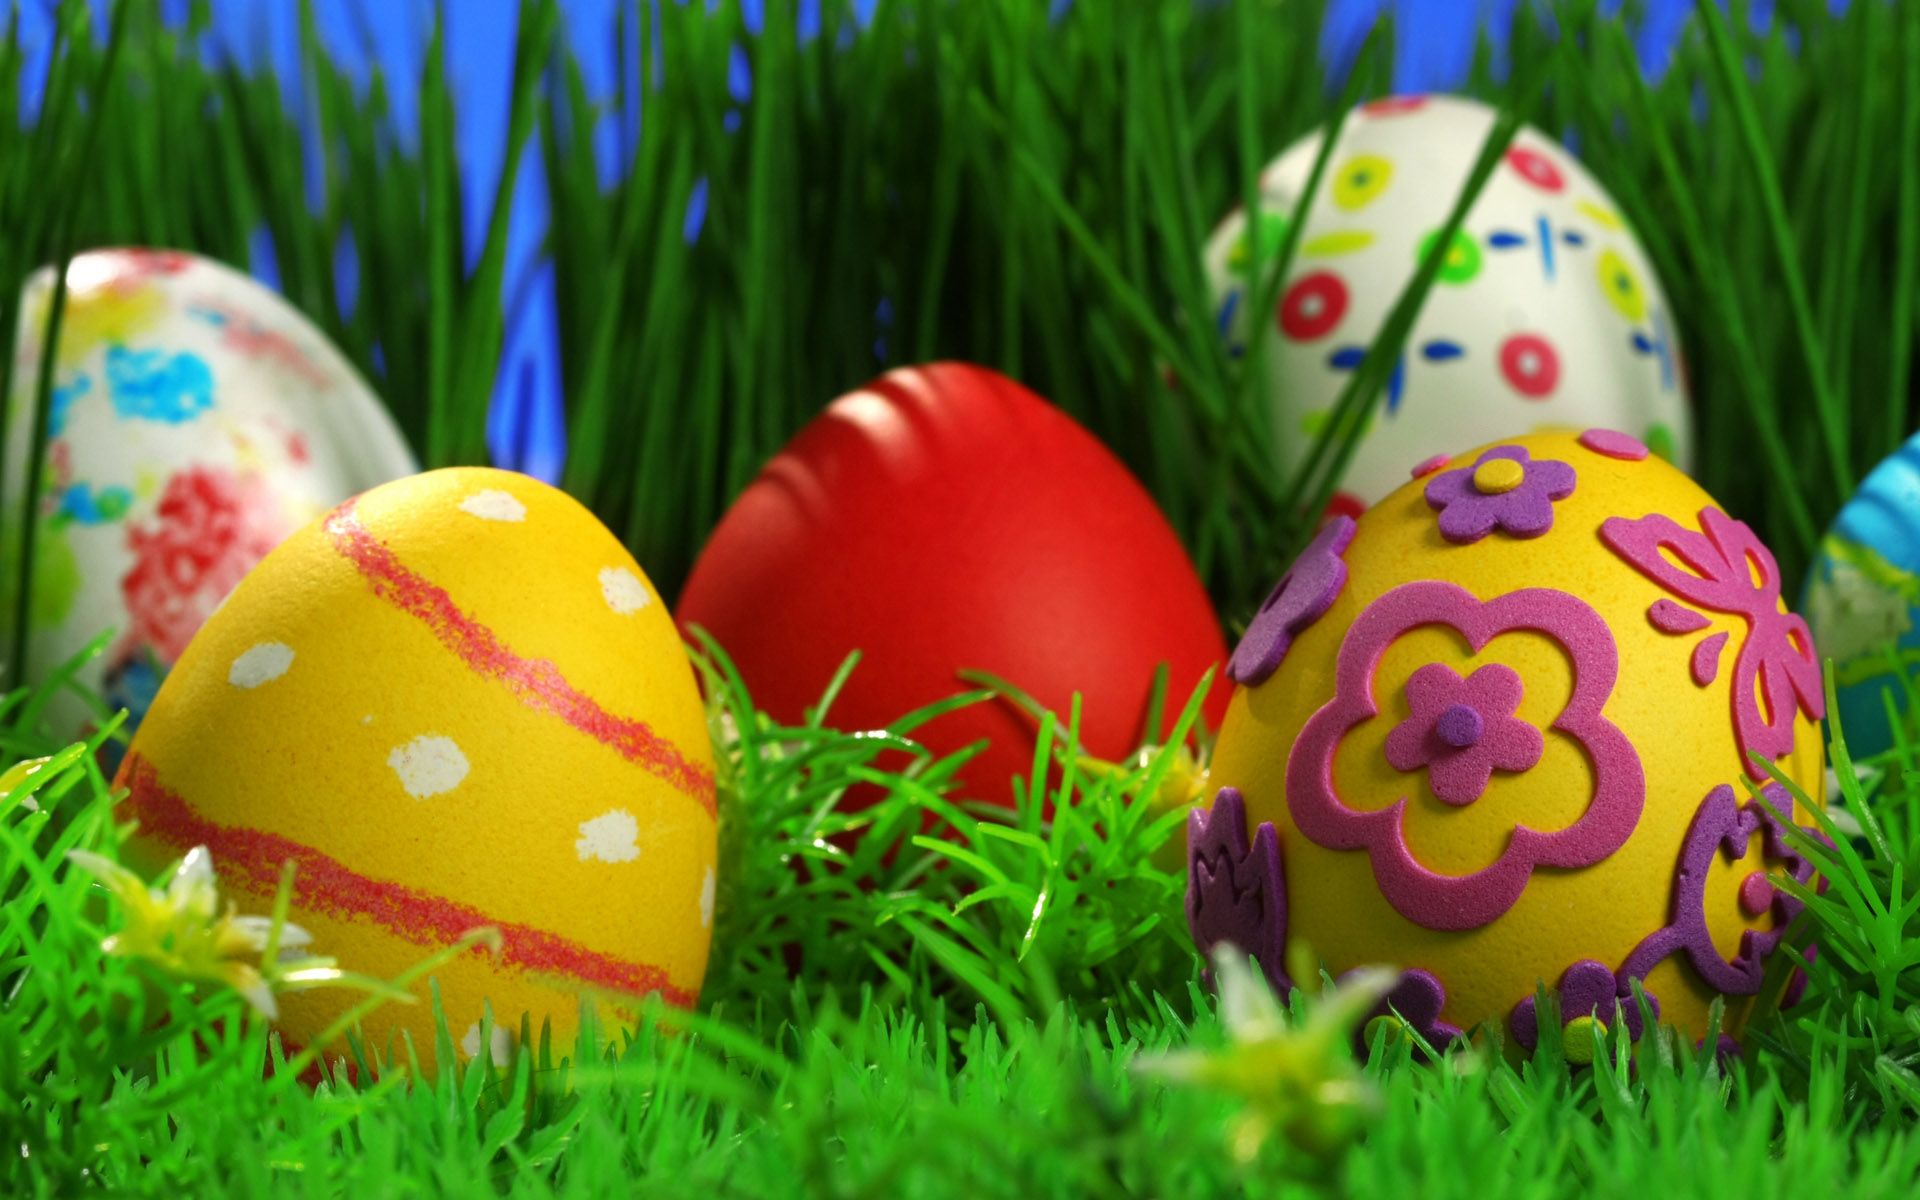 HD wallpaper, Easter, Pictures